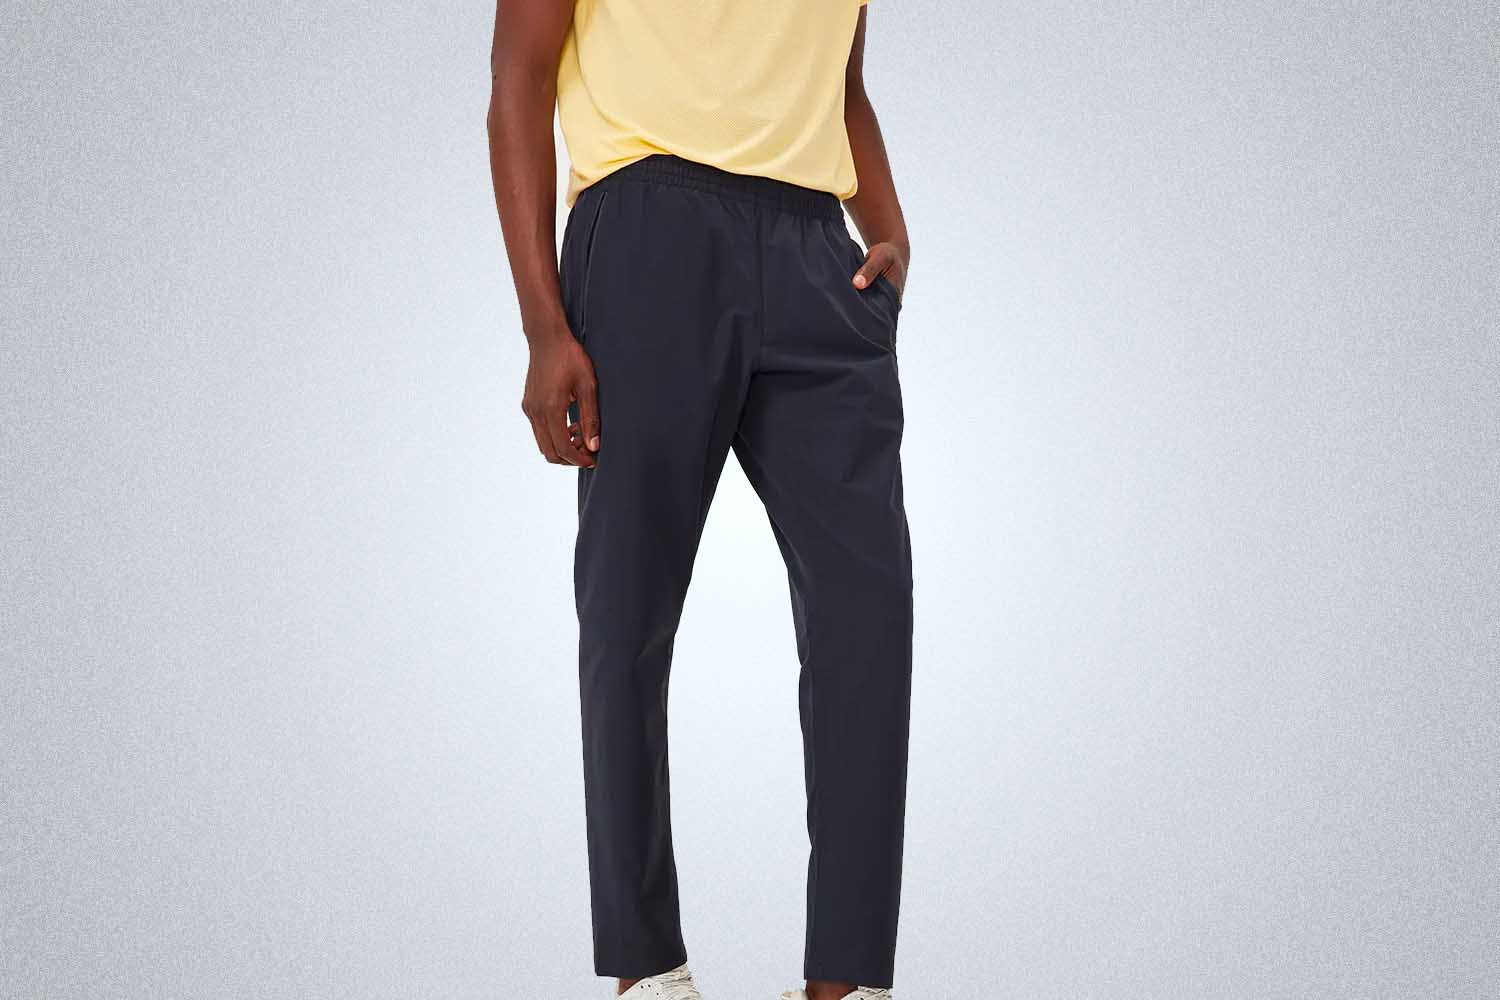 a model in a pair of the Outdoor Voices Rectrek Pants